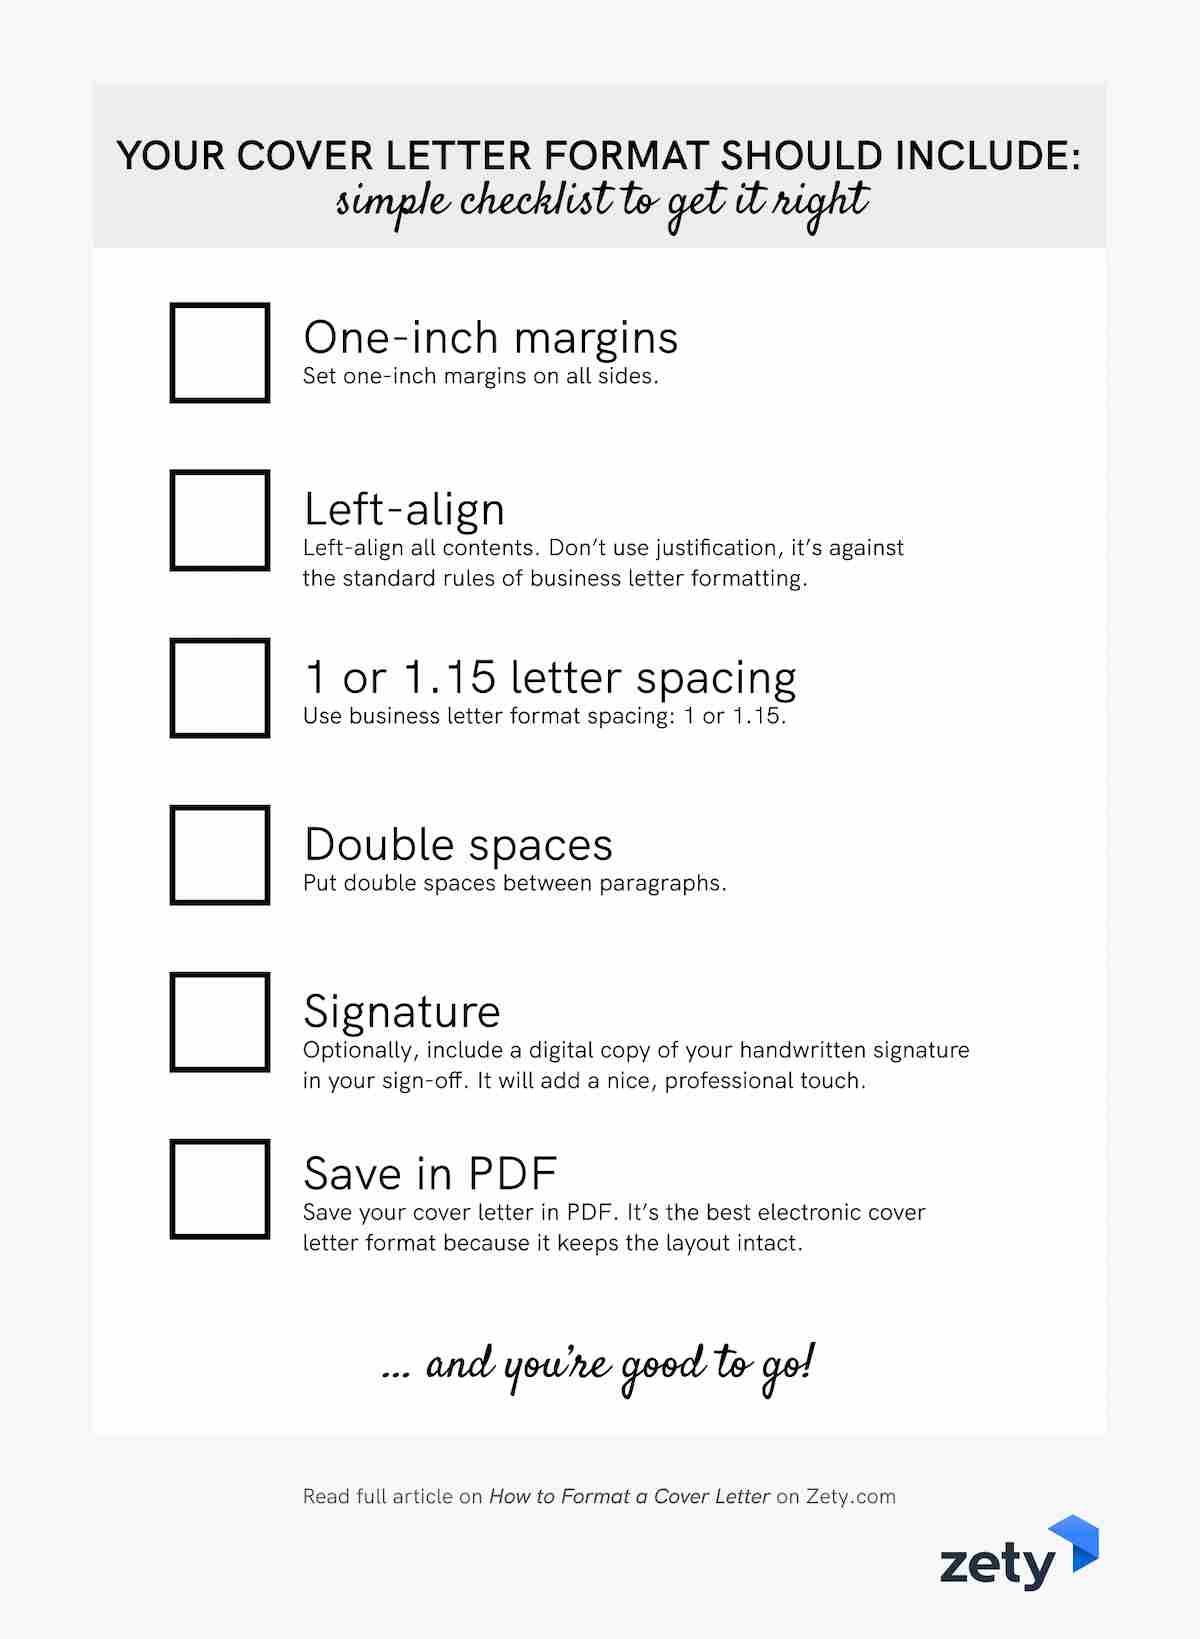 What should your cover letter include - checklist